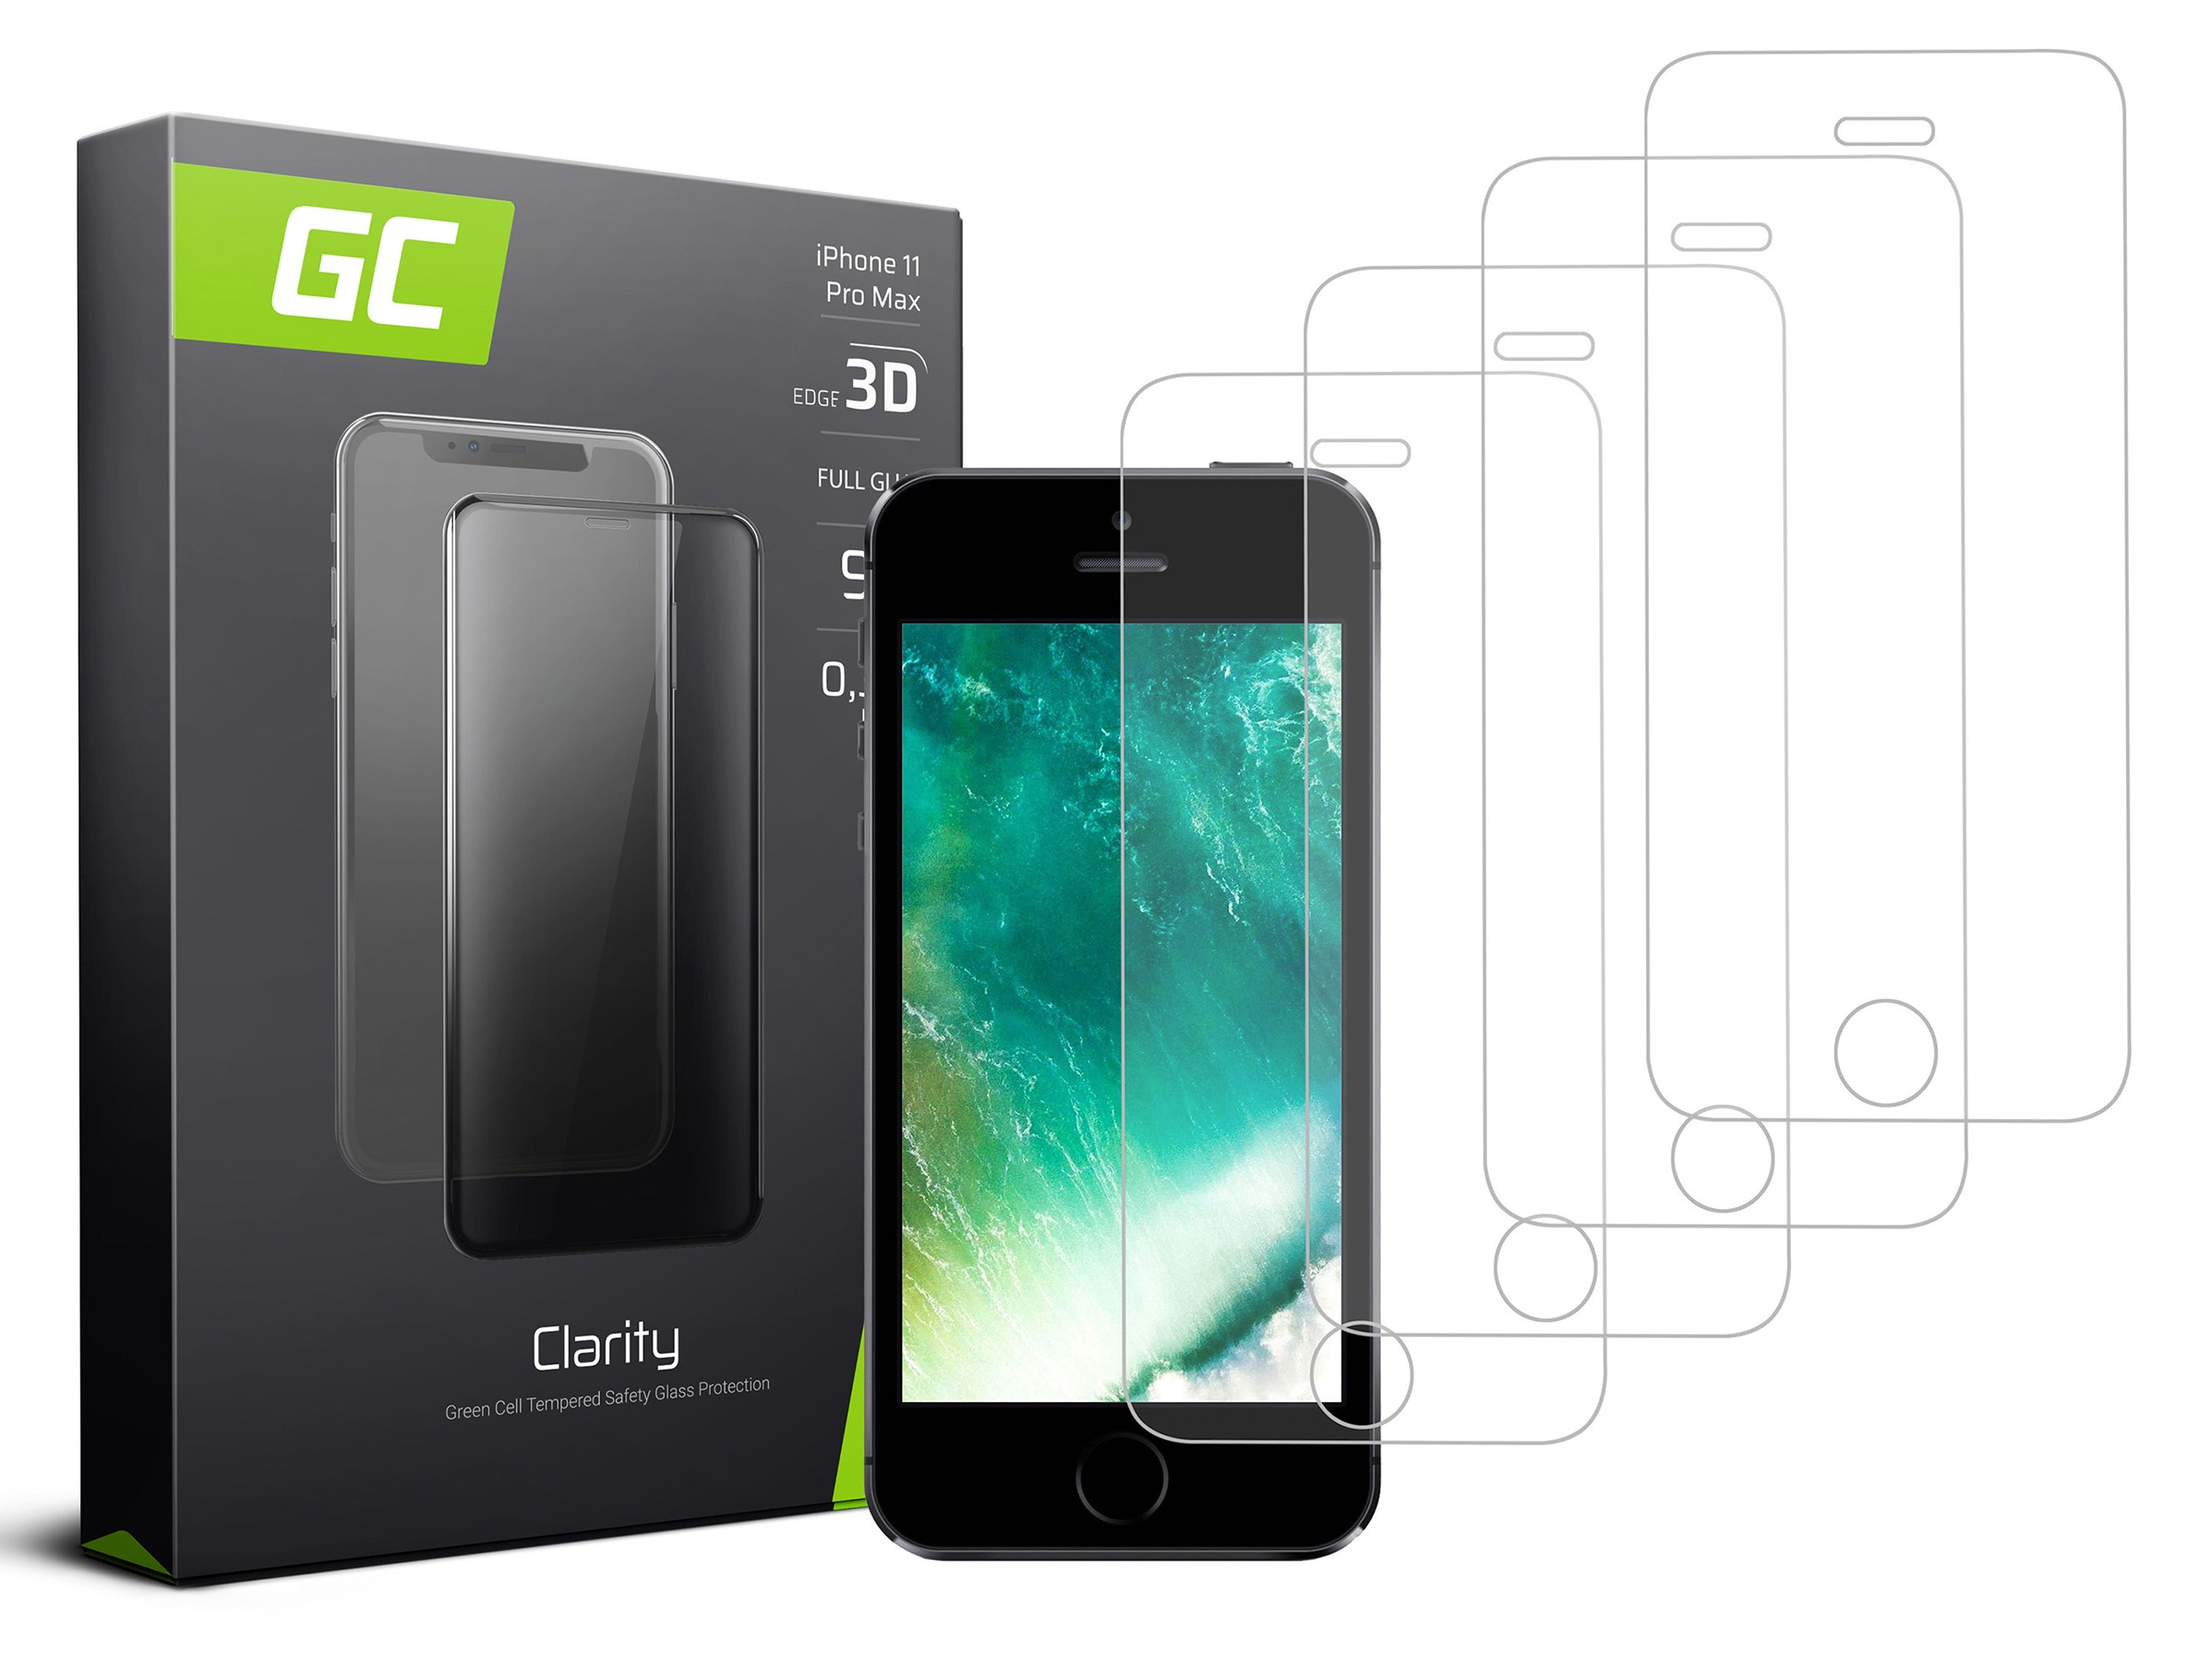 4x Screen Protector GC Clarity for Apple iPhone 5 / 5S / 5C / SE